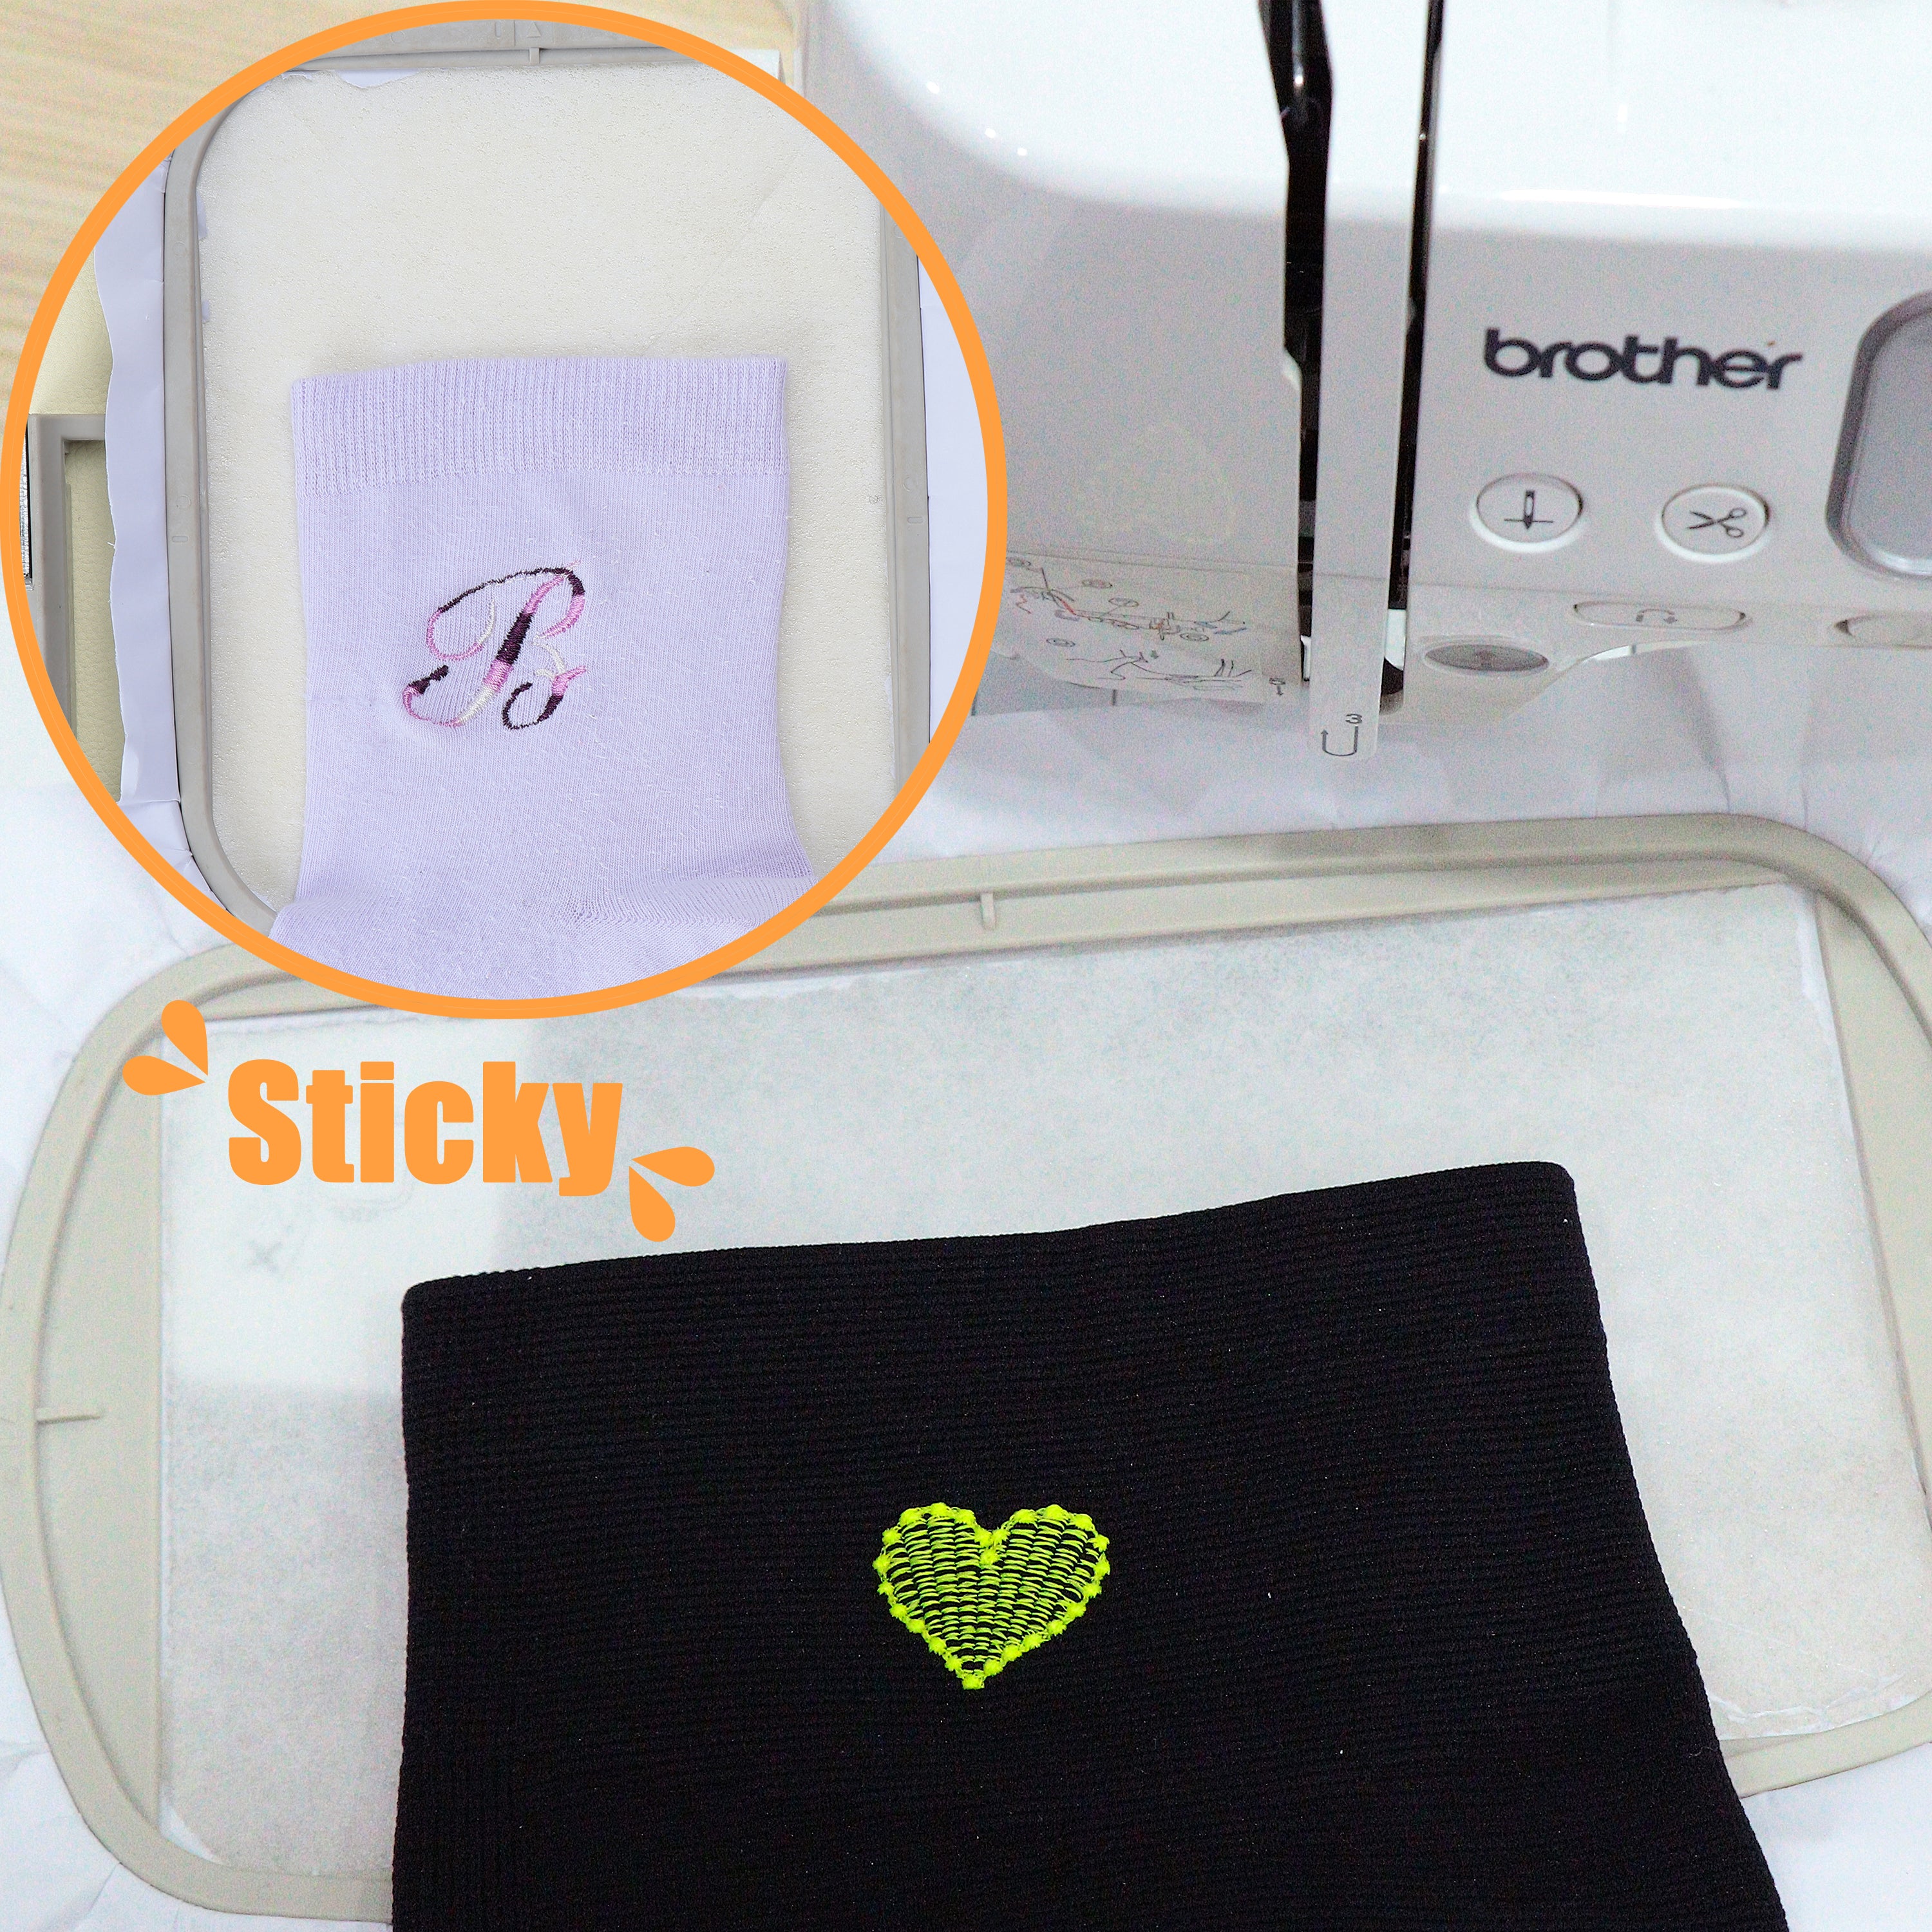 New brothread Sticky Self-Adhesive Tear Away Embroidery Stabilizer Backing